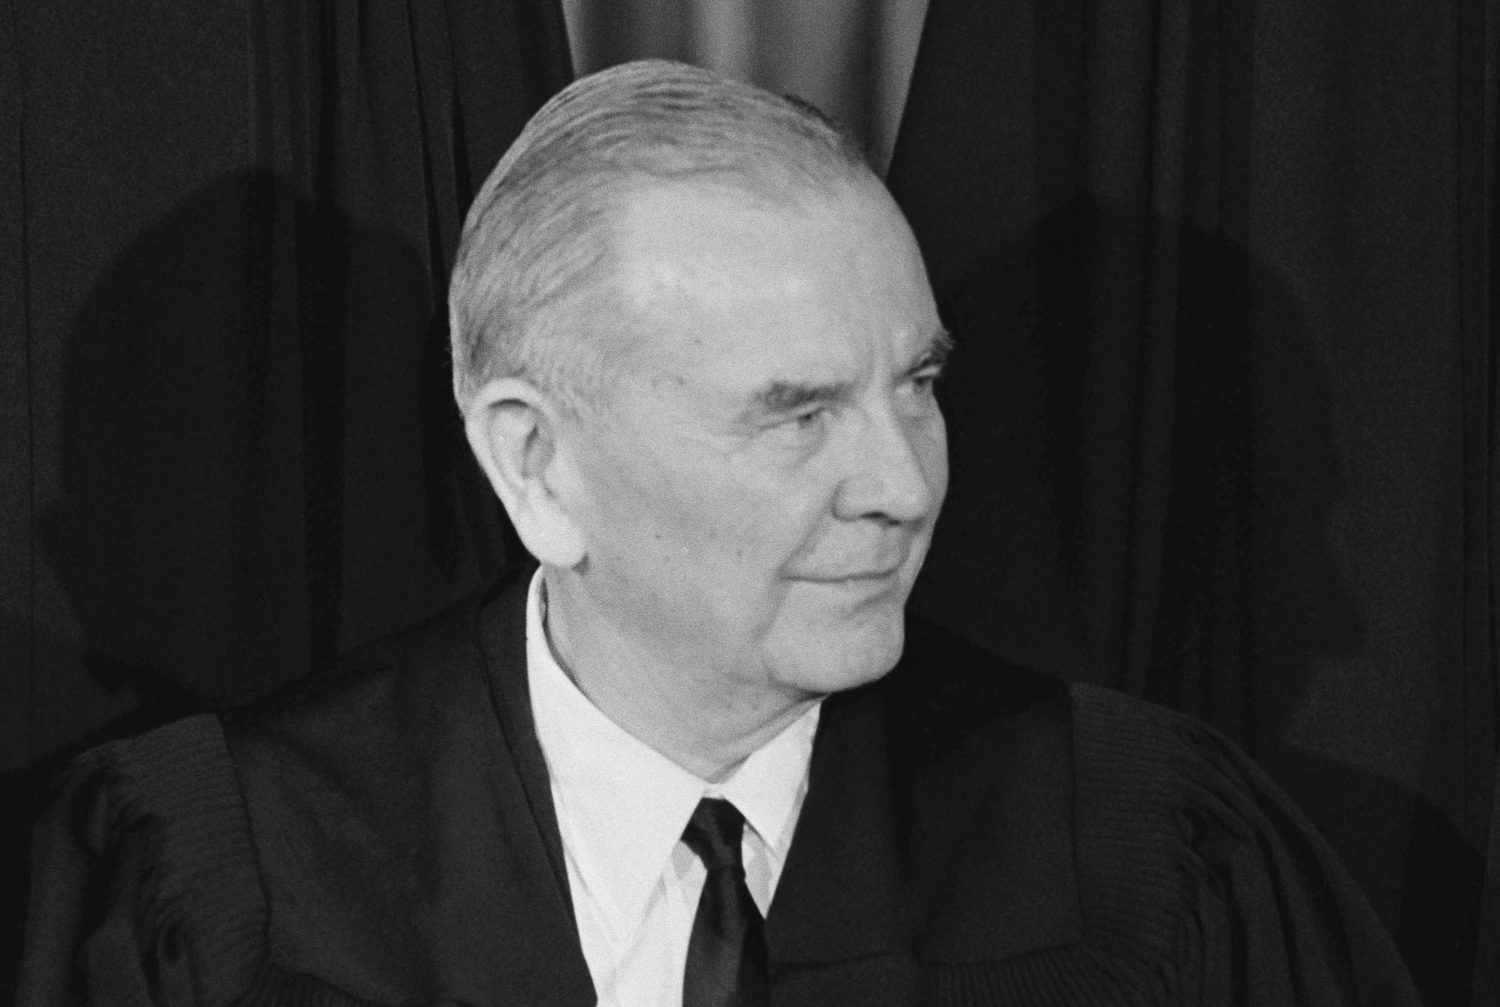 An older white male, with his hair slicked back, wearing a white shirt with a black tie under a black garment, looks off to his left. The photo is in black and white.